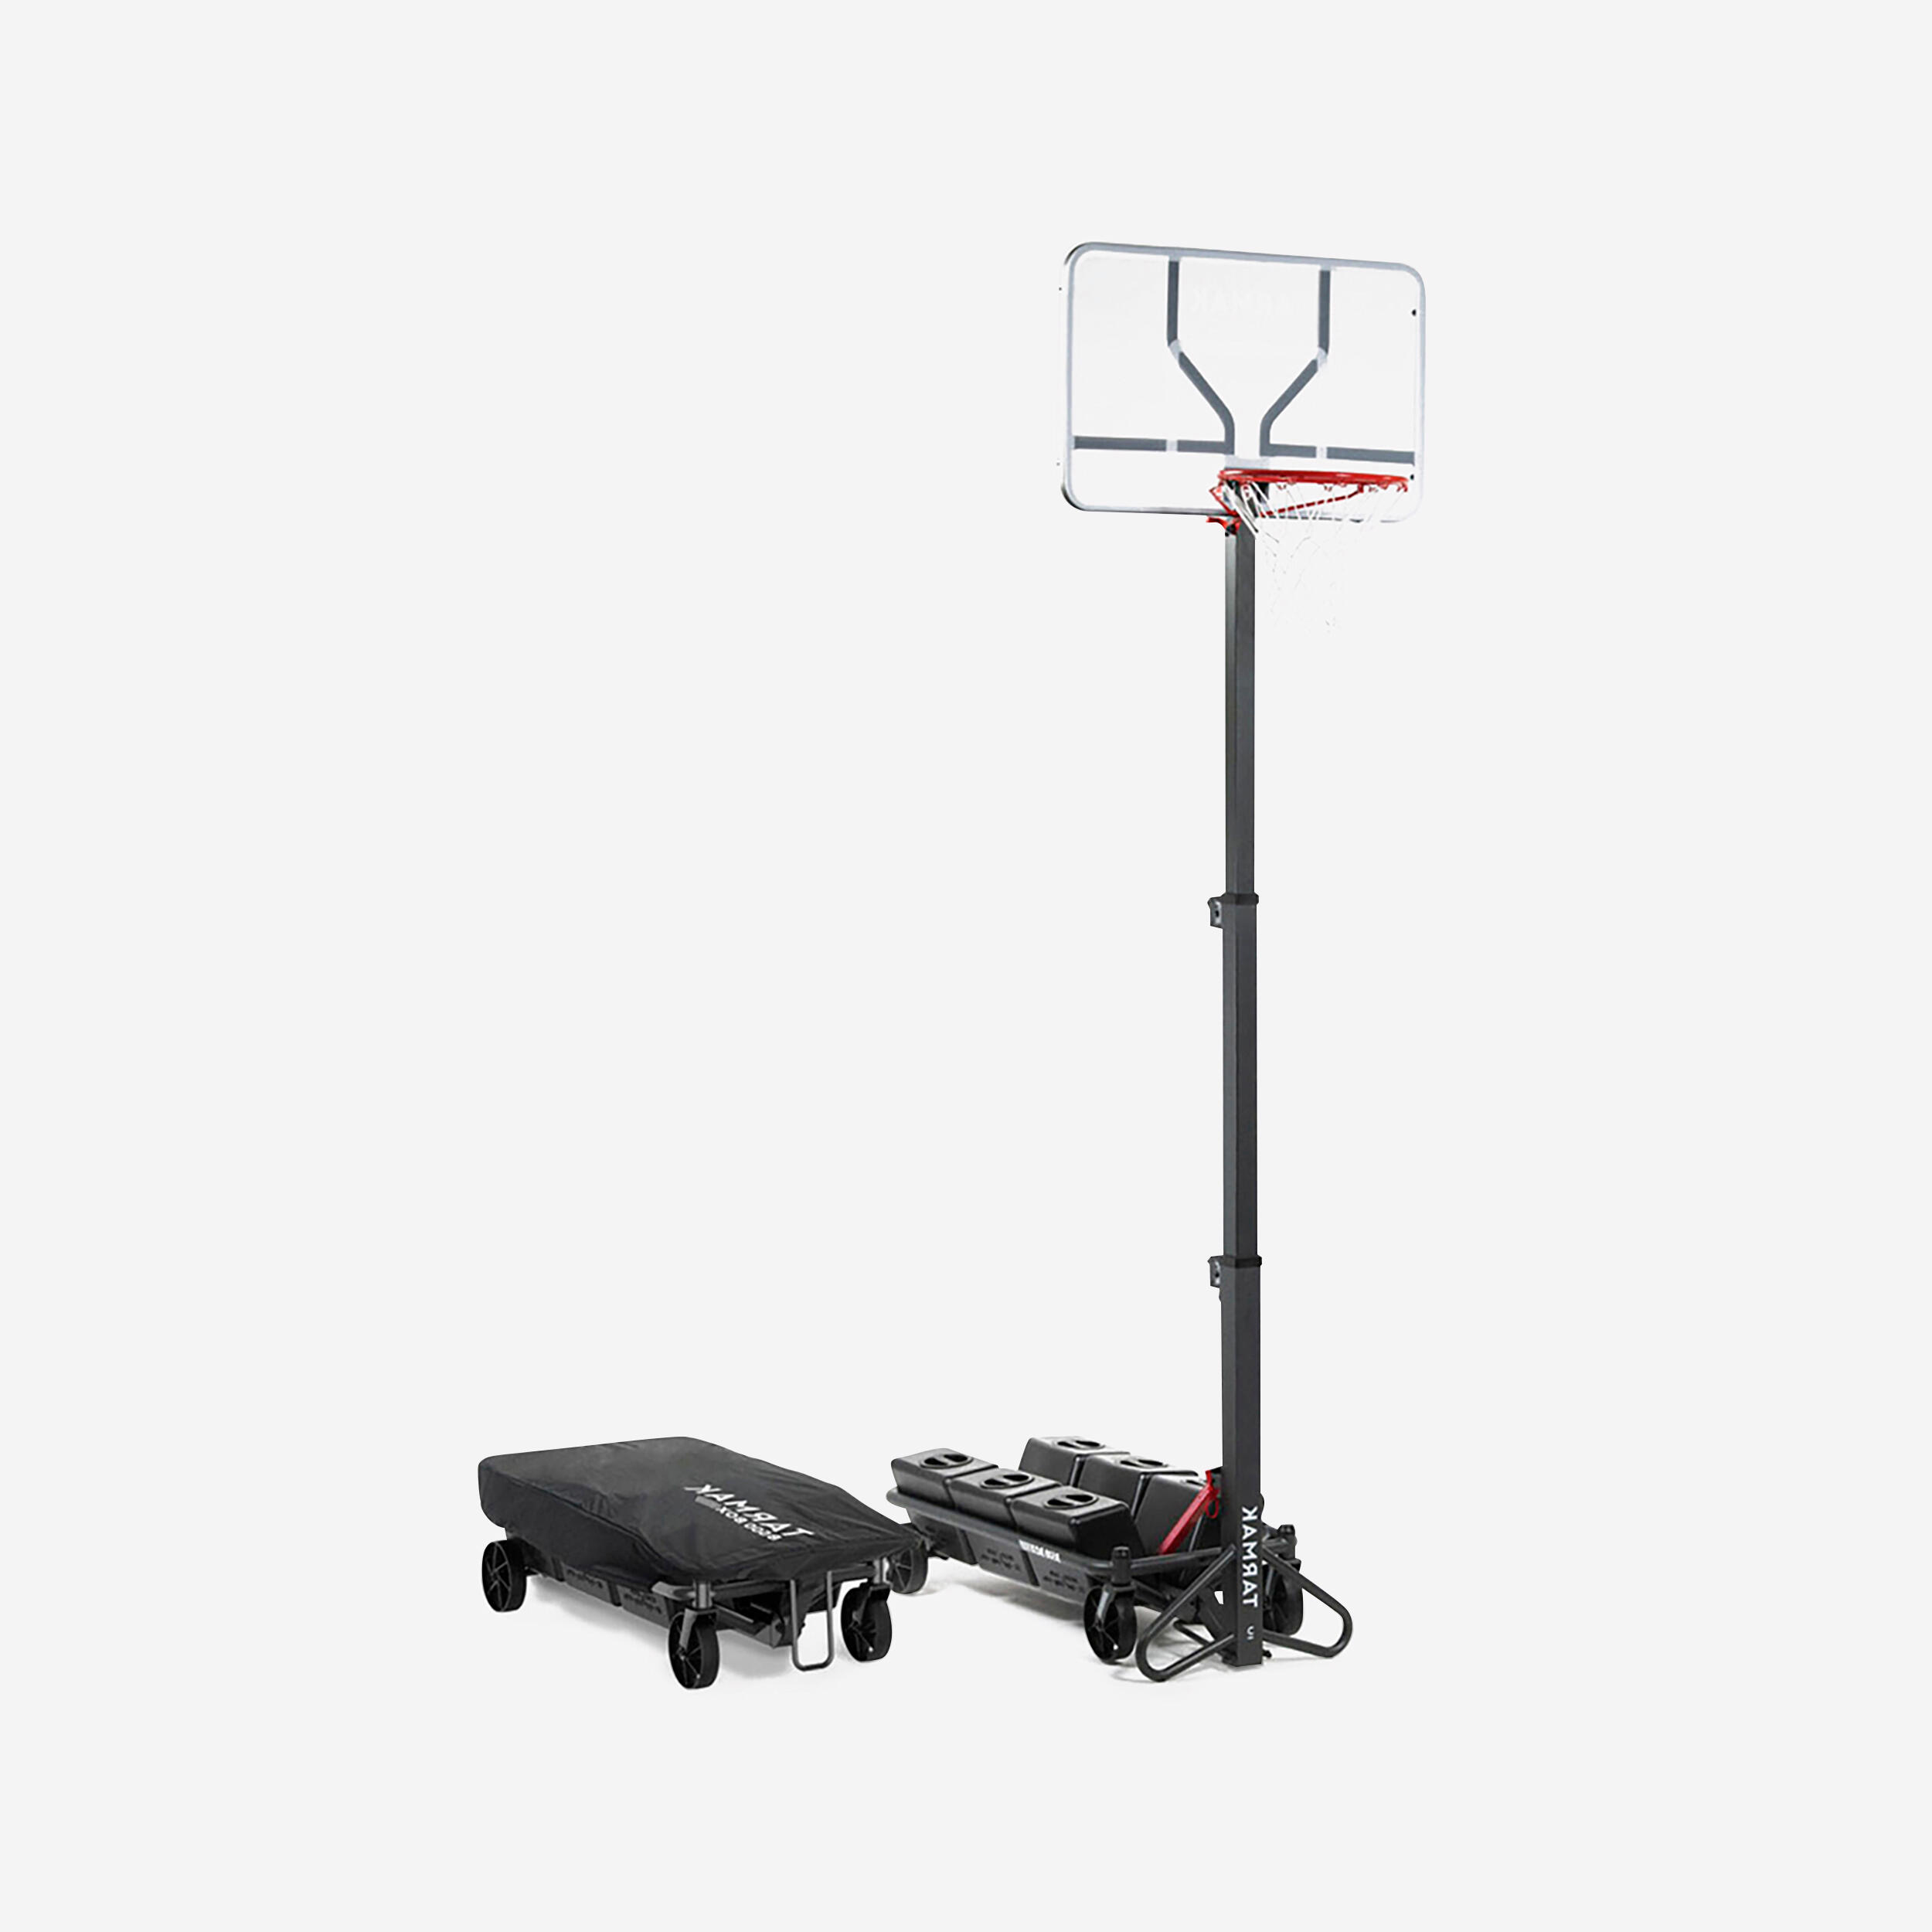 Basketball Hoop Standing Backboard B500 Easy Box Set UP and Store in 1 minute - One Size By TARMAK | Decathlon